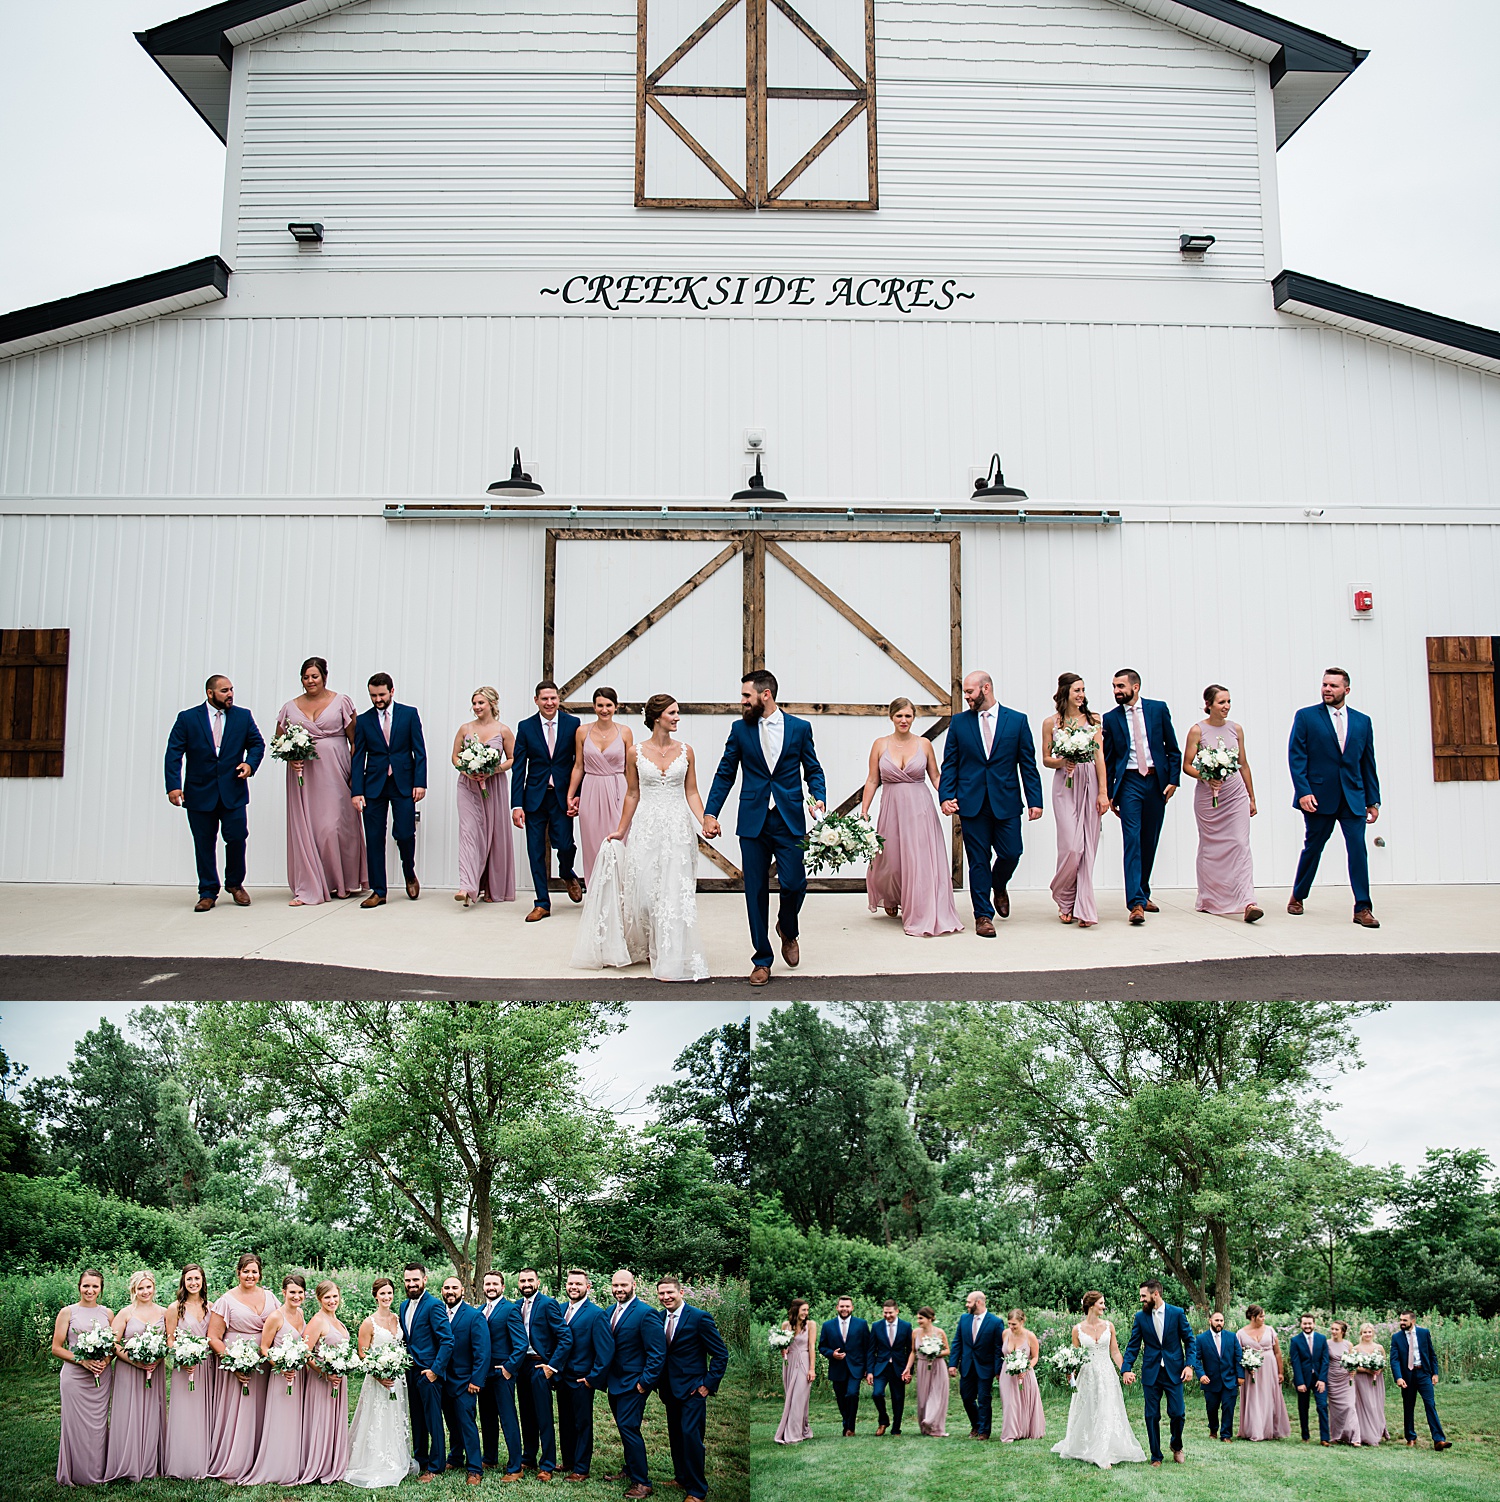 Bridal party outside of Creekside acres wedding event barn wearing blue suits and blush dresses